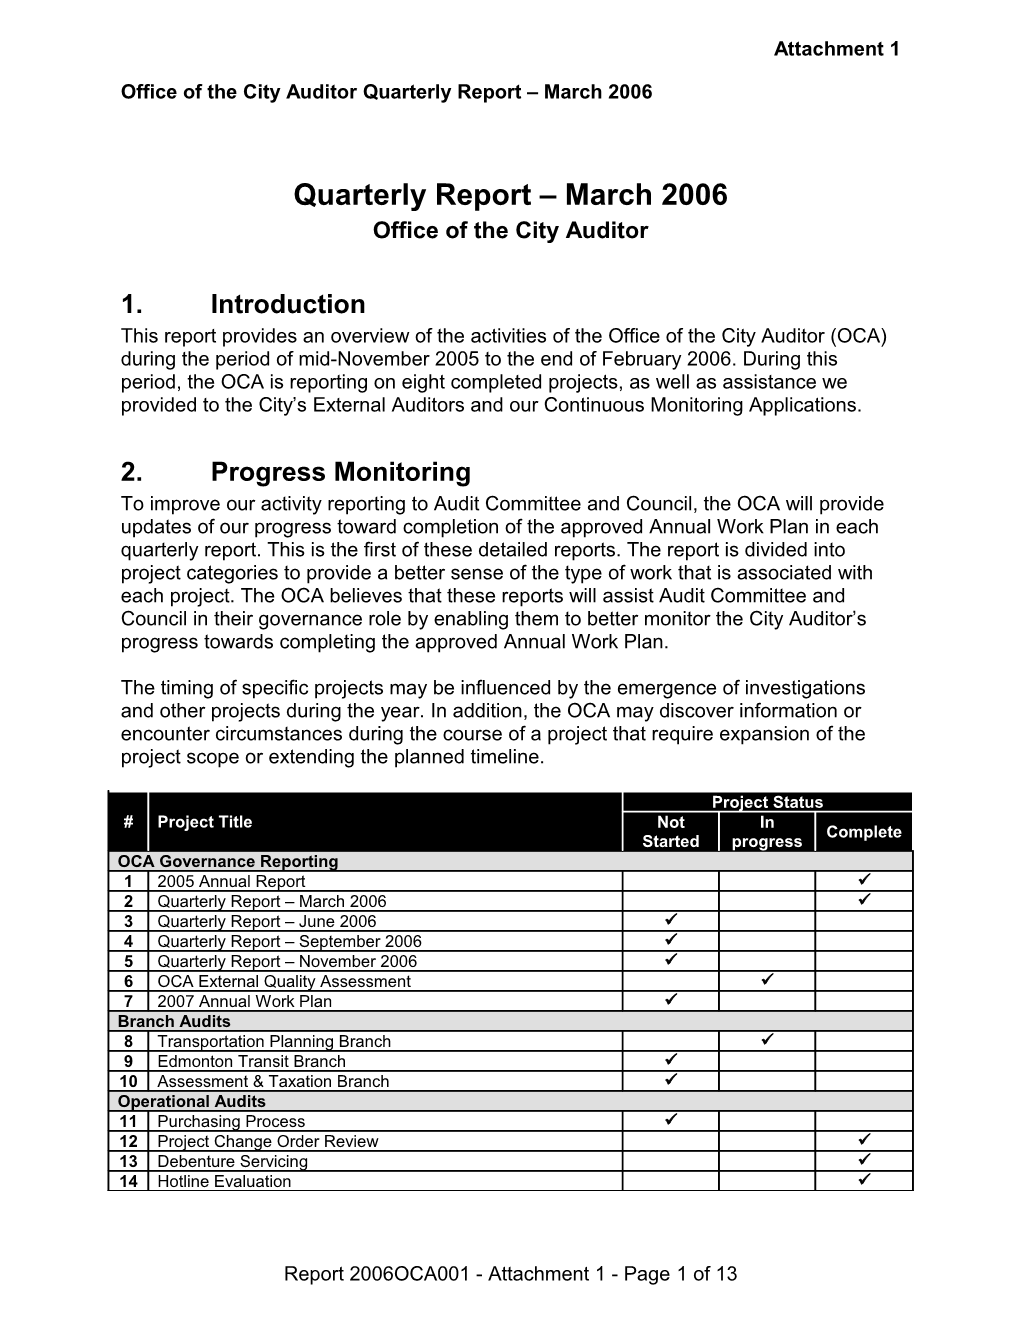 Report for Audit Committee March 16, 2006 Meeting